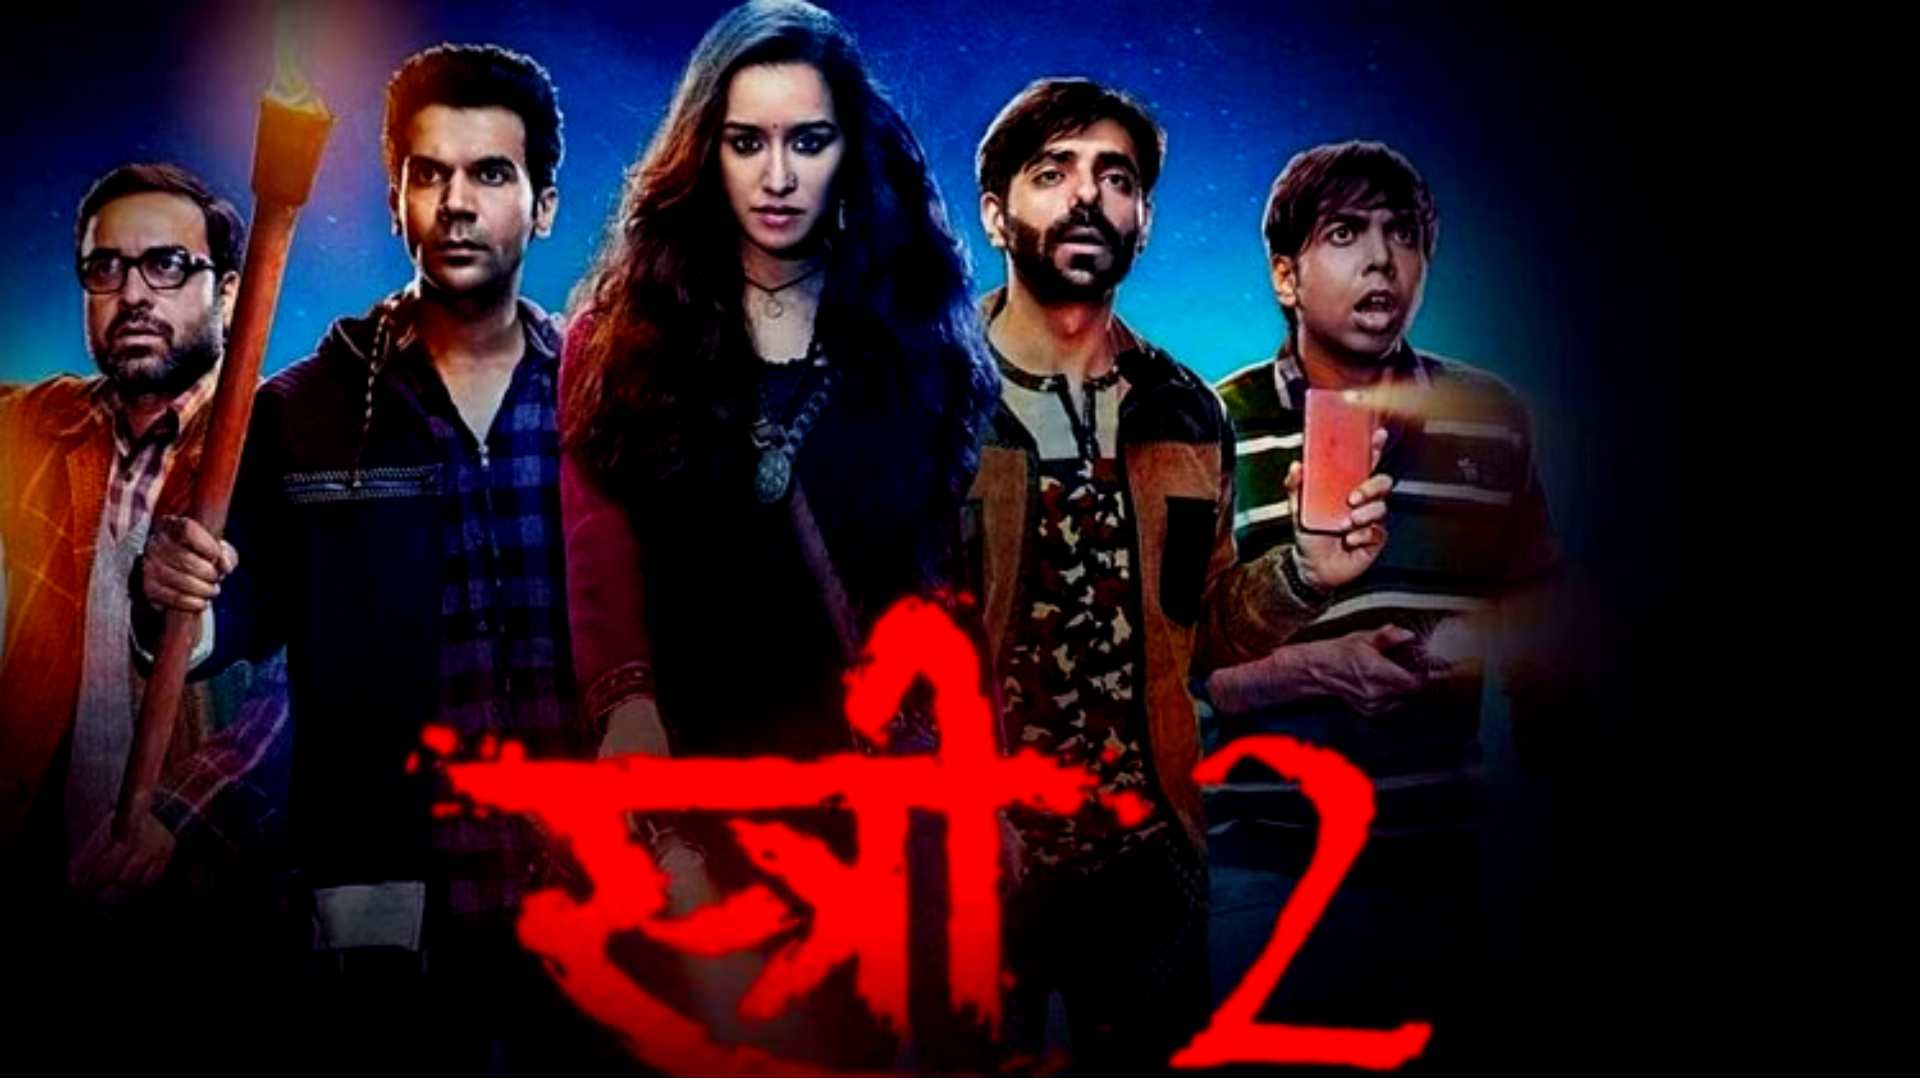 Stree 2 Release Date, Cast, Trailer, Movie Ticket Offers & More